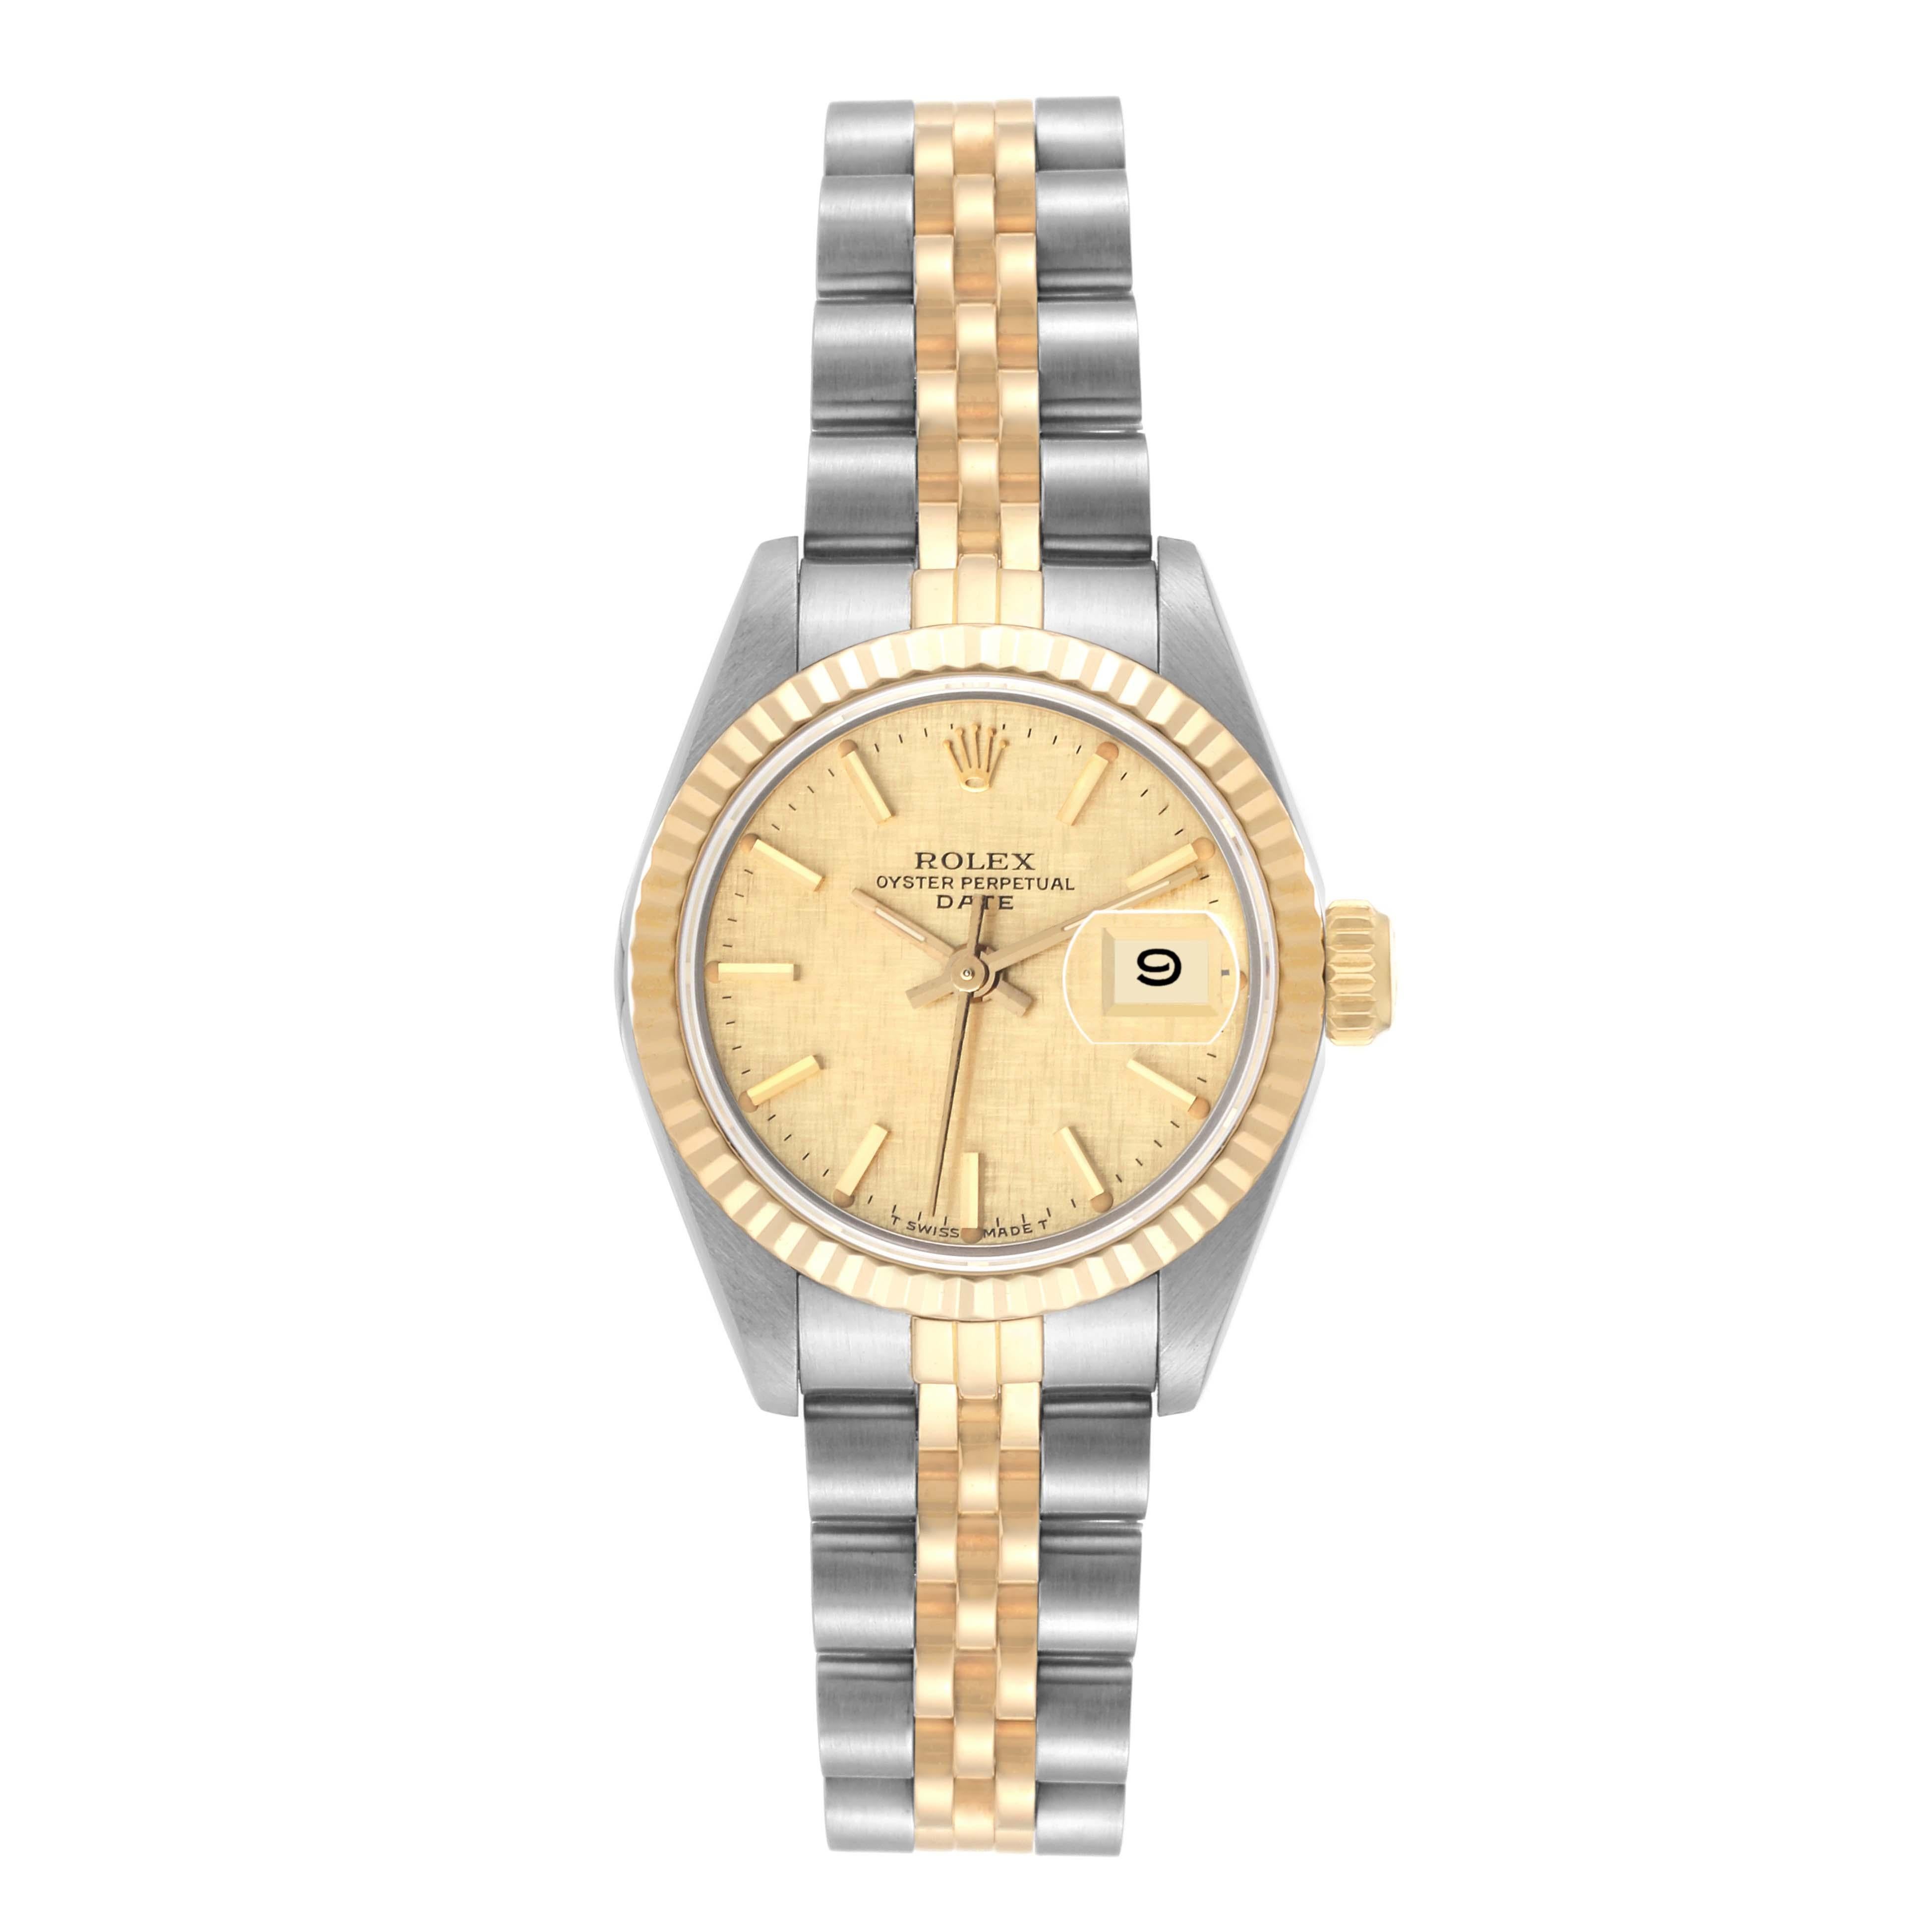 Rolex Datejust Steel Yellow Gold Champagne Linen Dial Ladies Watch 69173. Officially certified chronometer automatic self-winding movement. Stainless steel oyster case 26.0 mm in diameter. Rolex logo on the crown. 18k yellow gold fluted bezel.